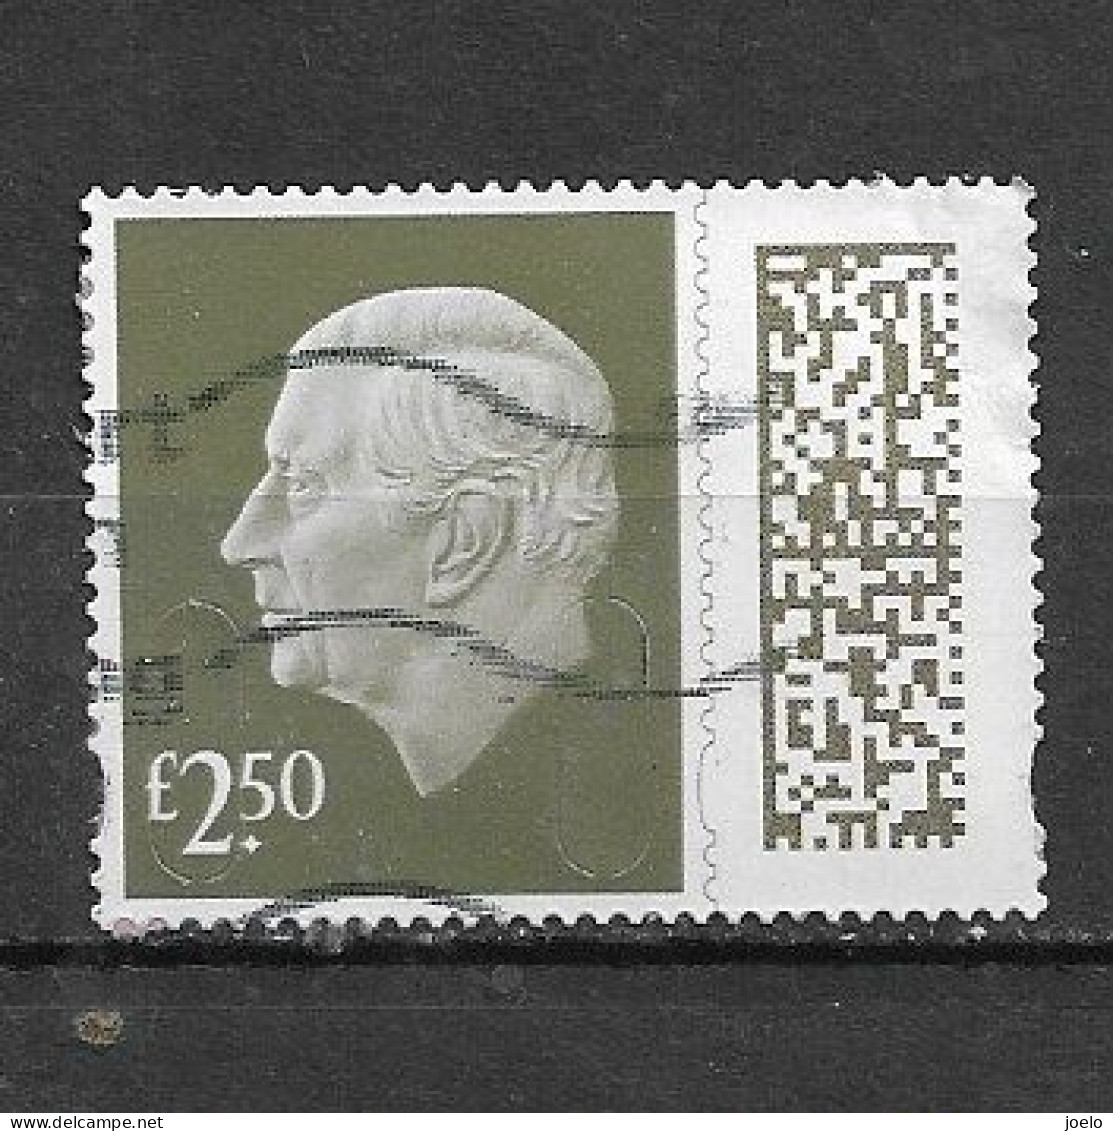 GB 2024 KC Lll £2.50  MACHIN BAR CODE DEFINITIVE - Used Stamps